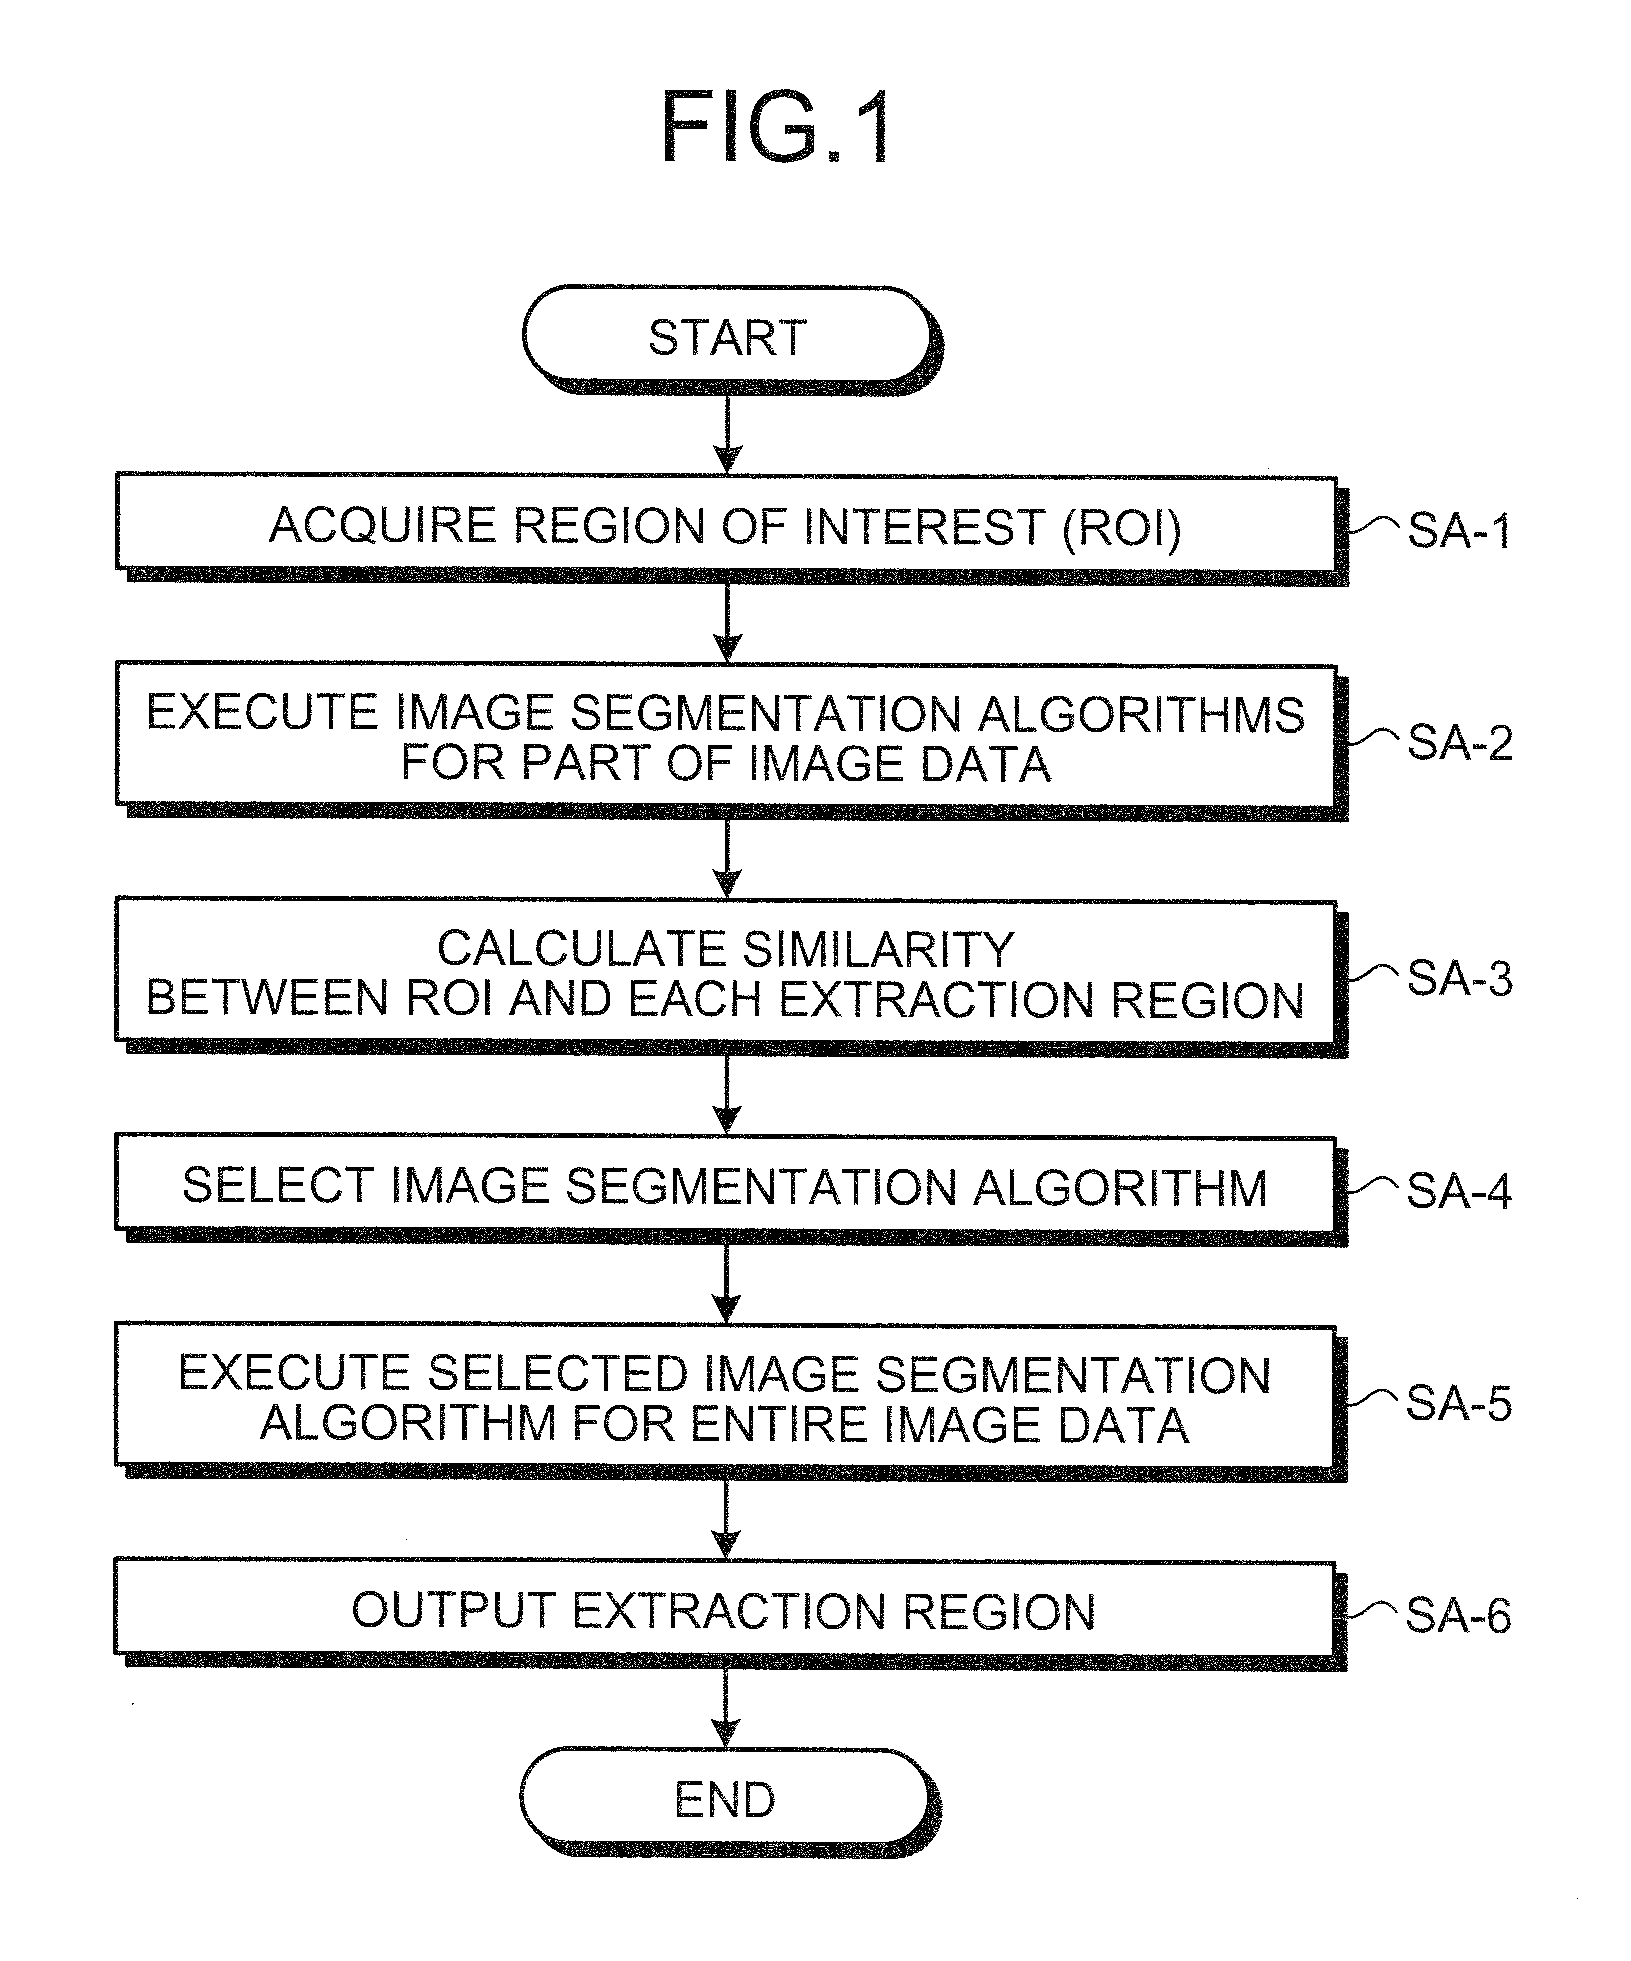 Image processing apparatus, image processing method, and computer program product